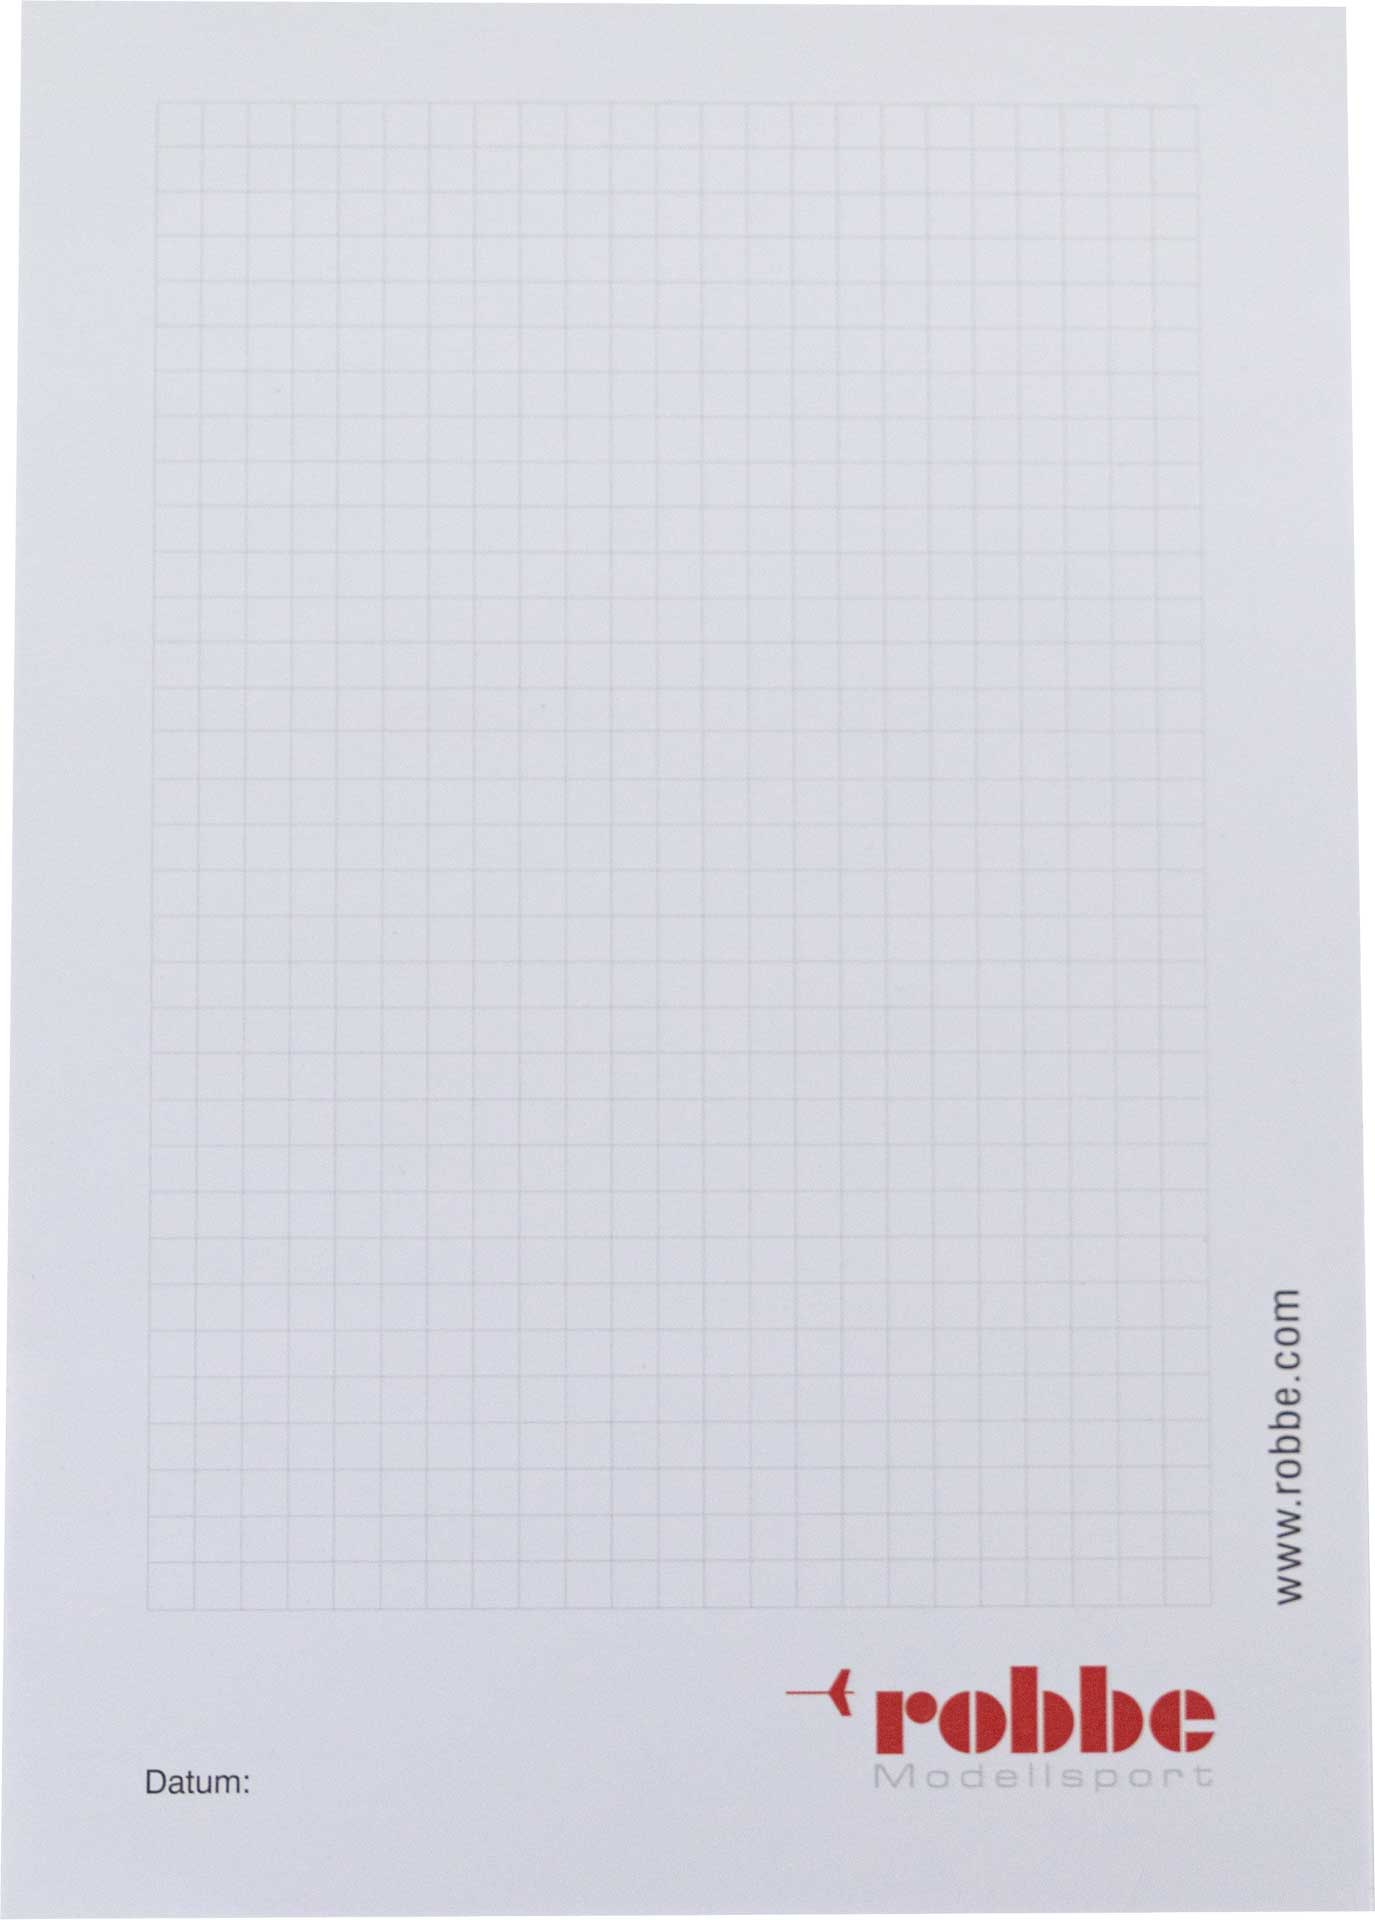 Robbe Modellsport Notepad A5 portrait format "ROBBE"